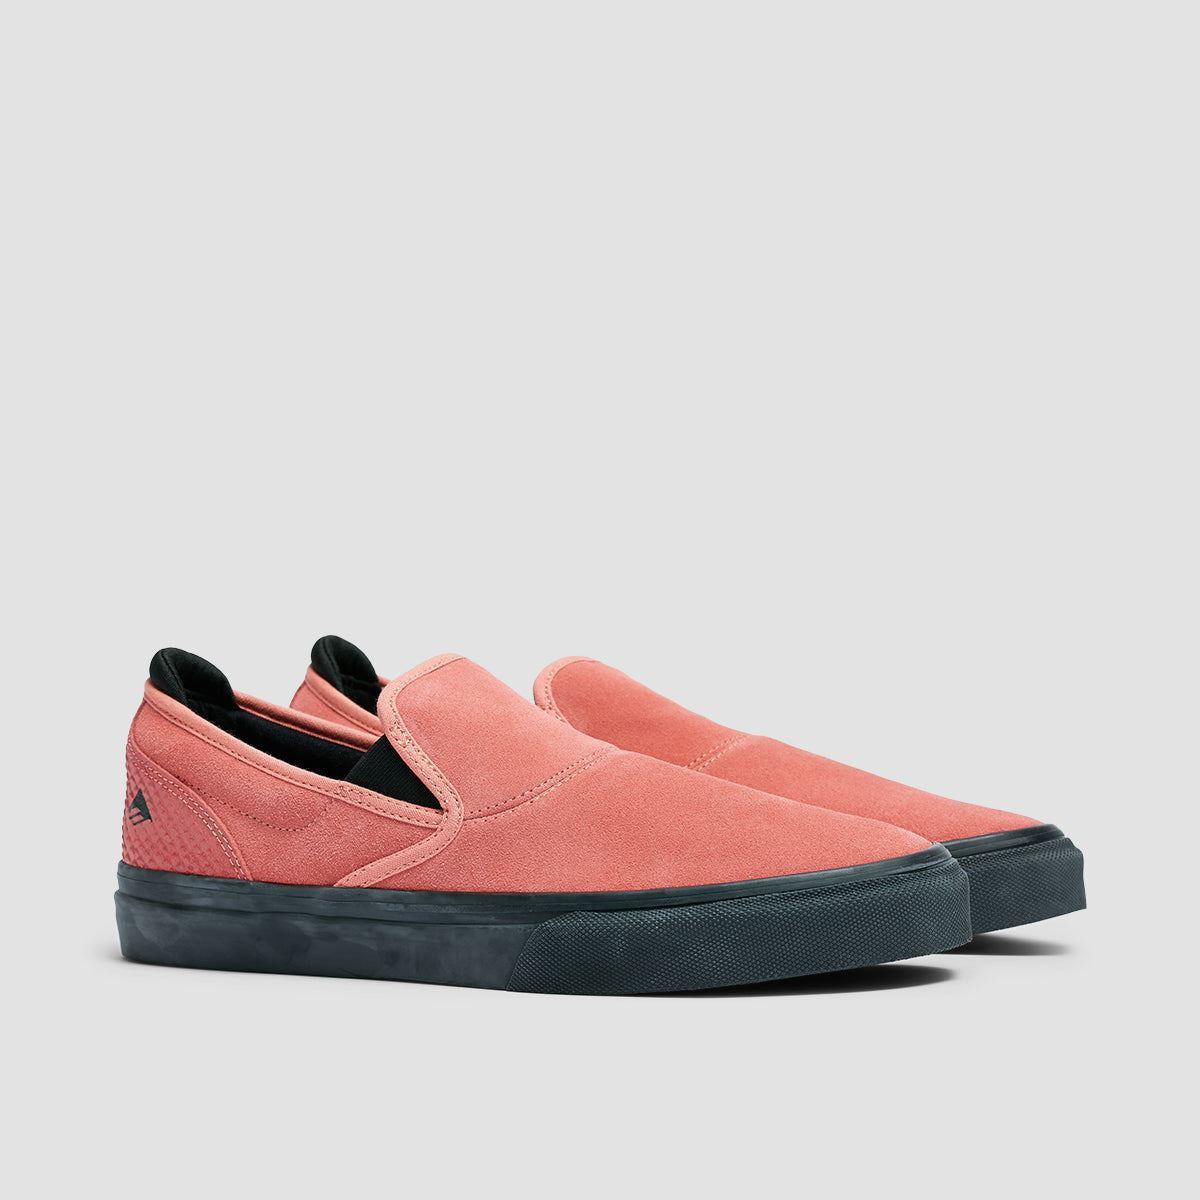 Emerica Wino G6 Slip On Shoes Coral